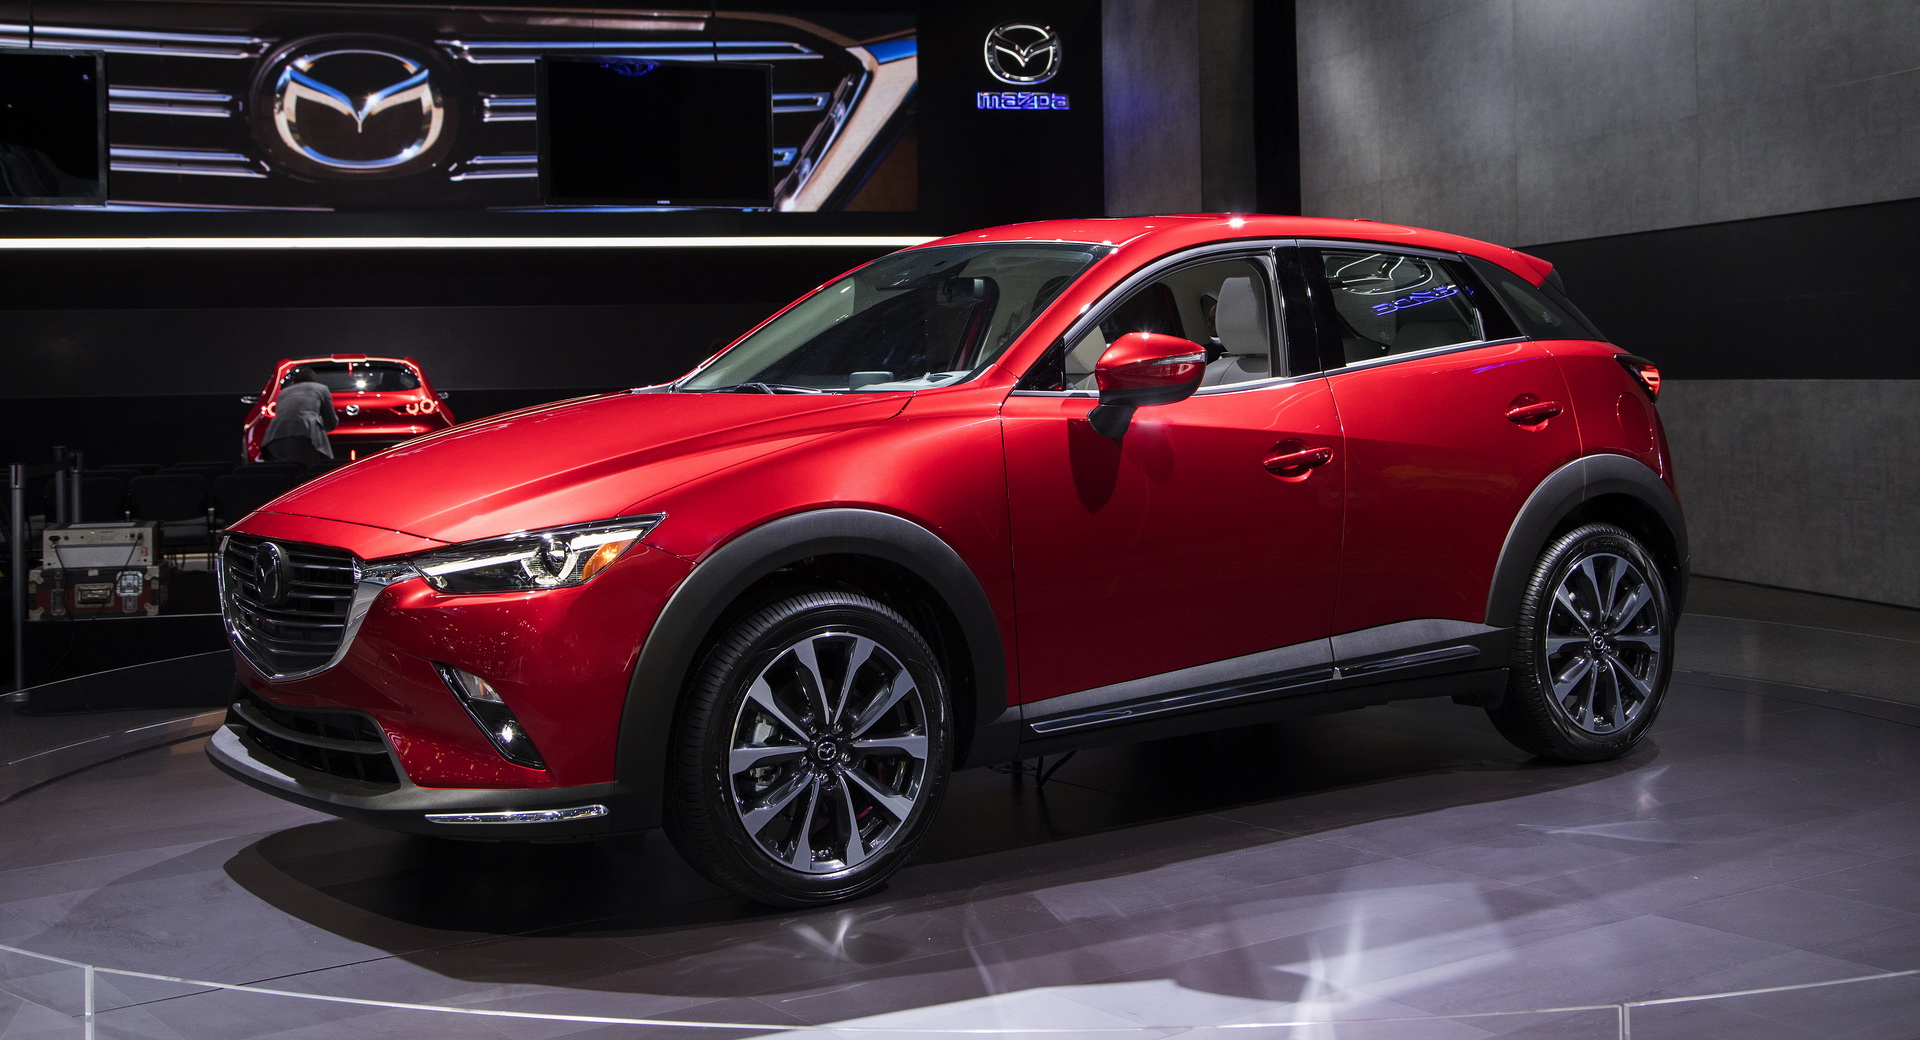 2020 Mazda CX-3 Comes In Just One But Fully Loaded Trim Priced From $21,685  | Carscoops